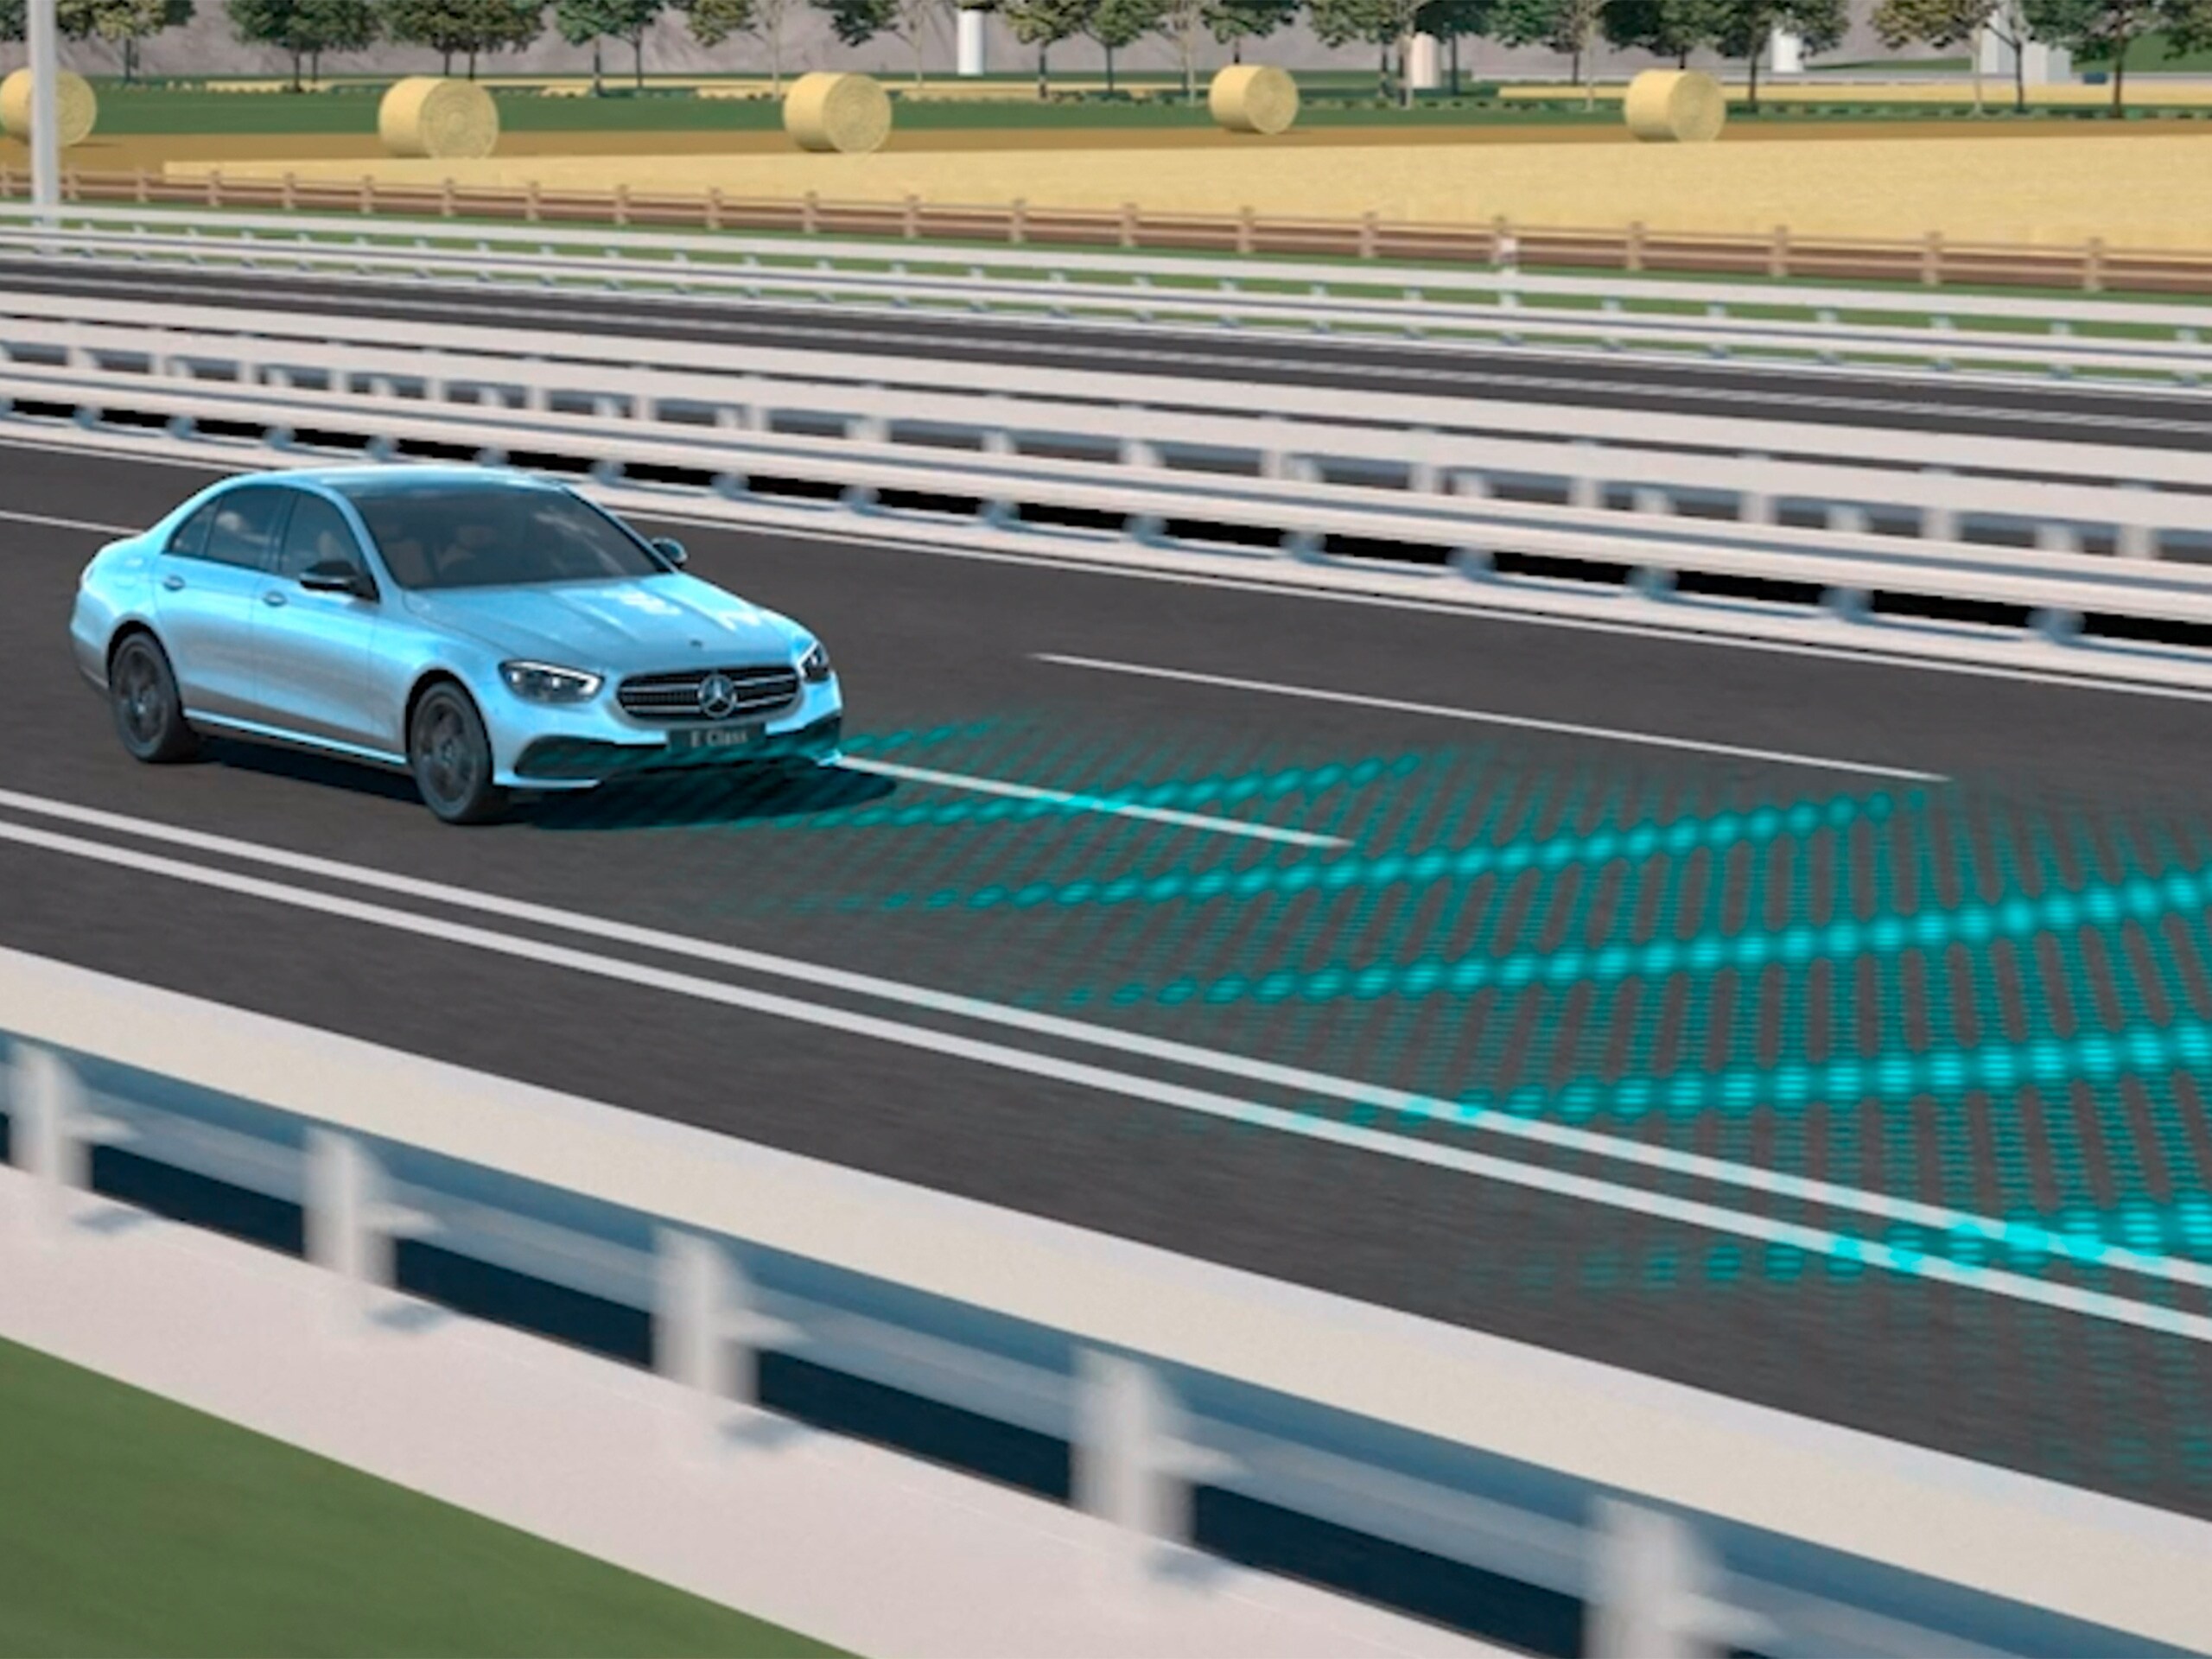 The video shows the function of the Active Distance Assist DISTRONIC in the Mercedes-Benz CLS Coupé.